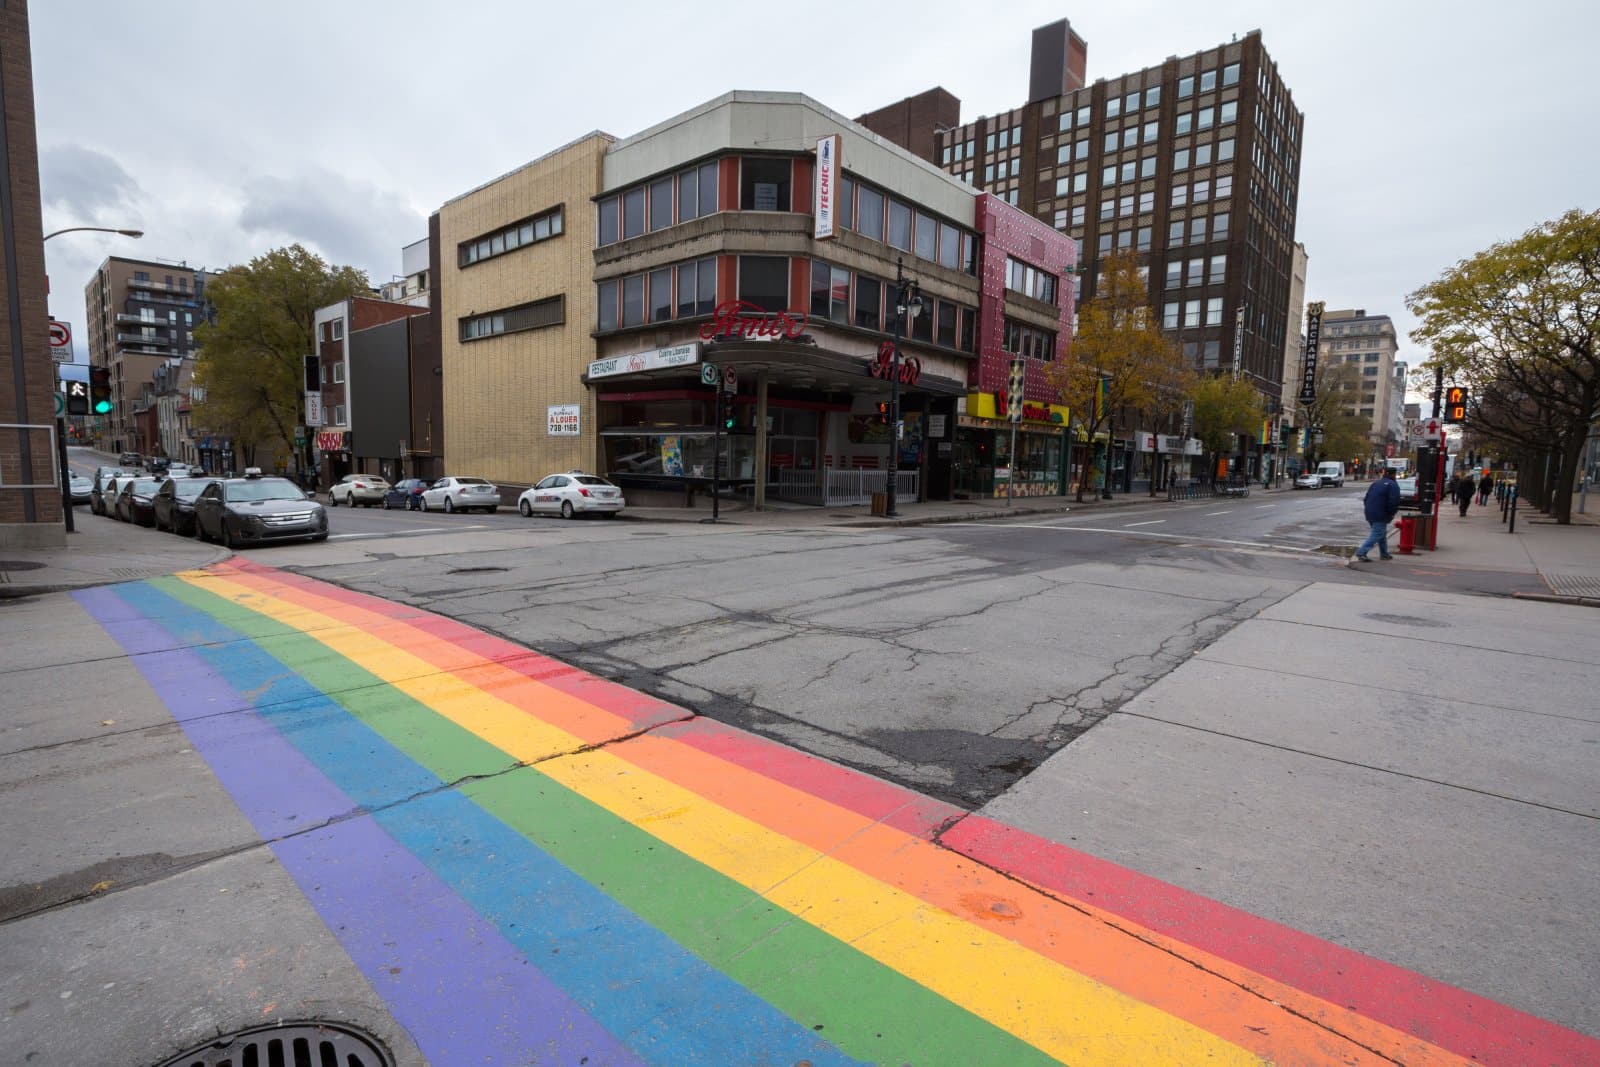 Image Credit: Shutterstock / BalkansCat <p><span>With its lively LGBTQ+ district, Le Village, Montreal is known for its inclusive atmosphere, French charm, and colorful Pride celebrations.</span></p>